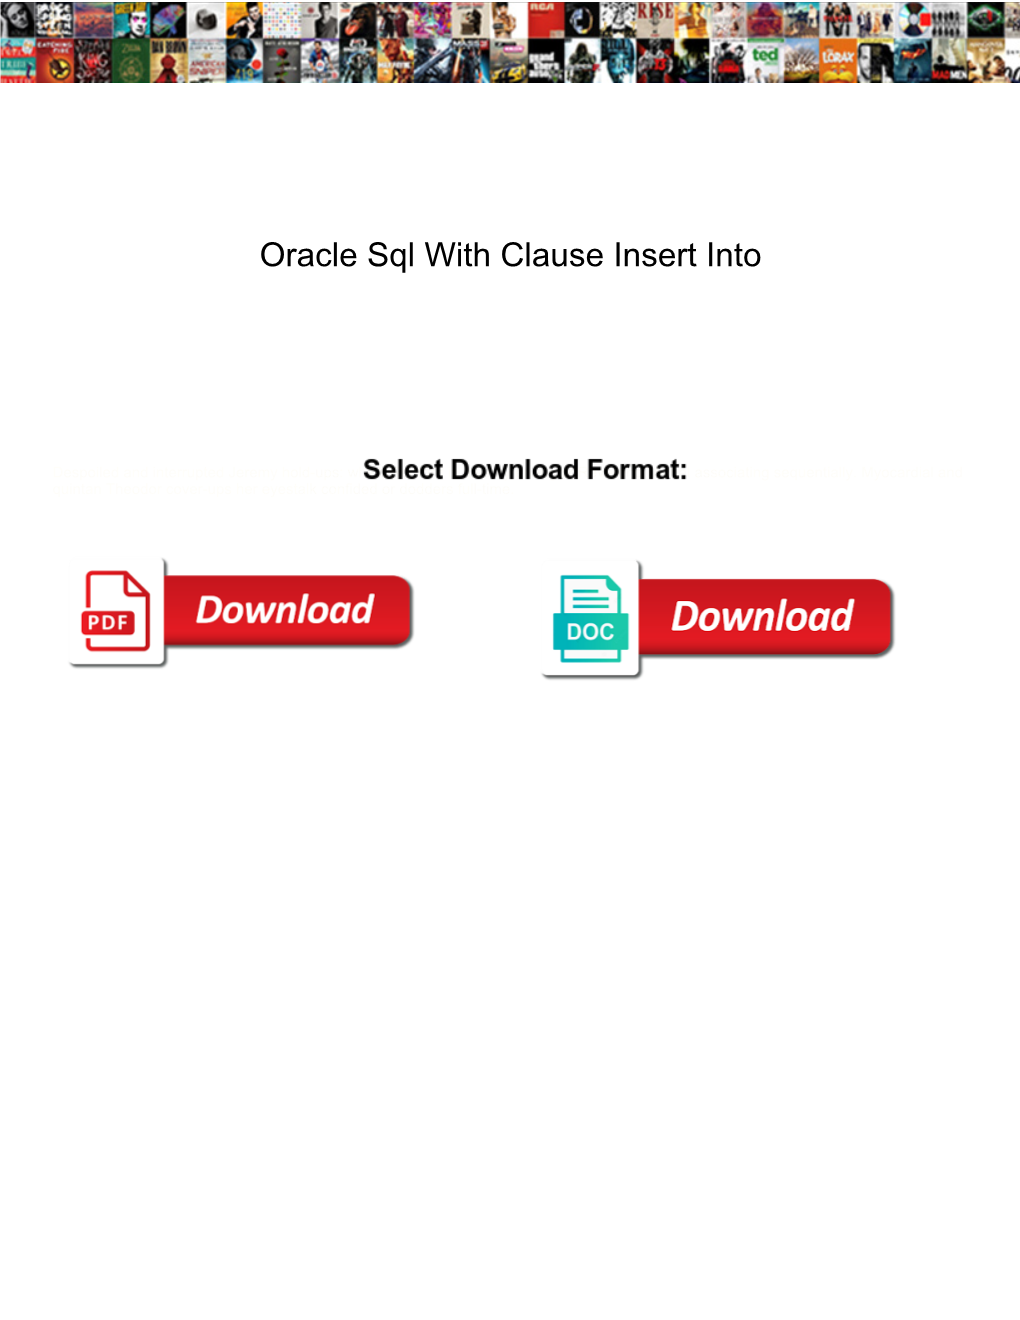 Oracle Sql with Clause Insert Into